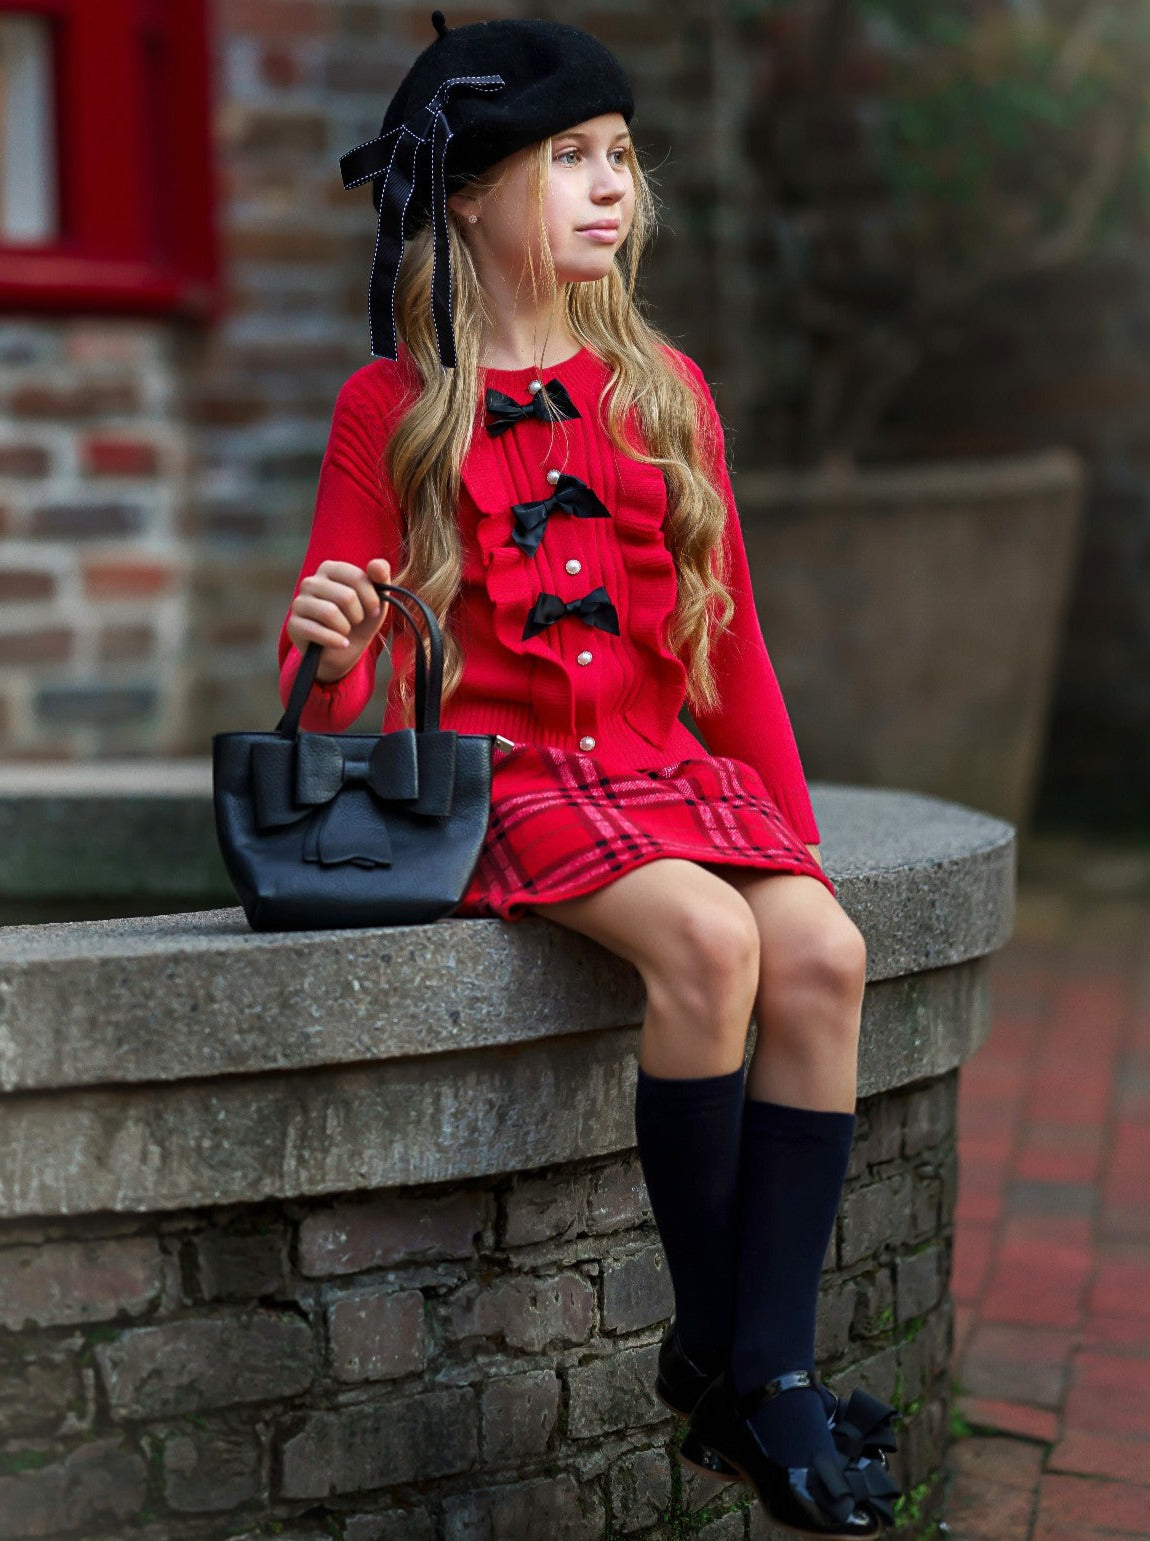 Preppy Chic Clothes | Red Cardigan & Plaid Skirt Set | Mia Belle Girls